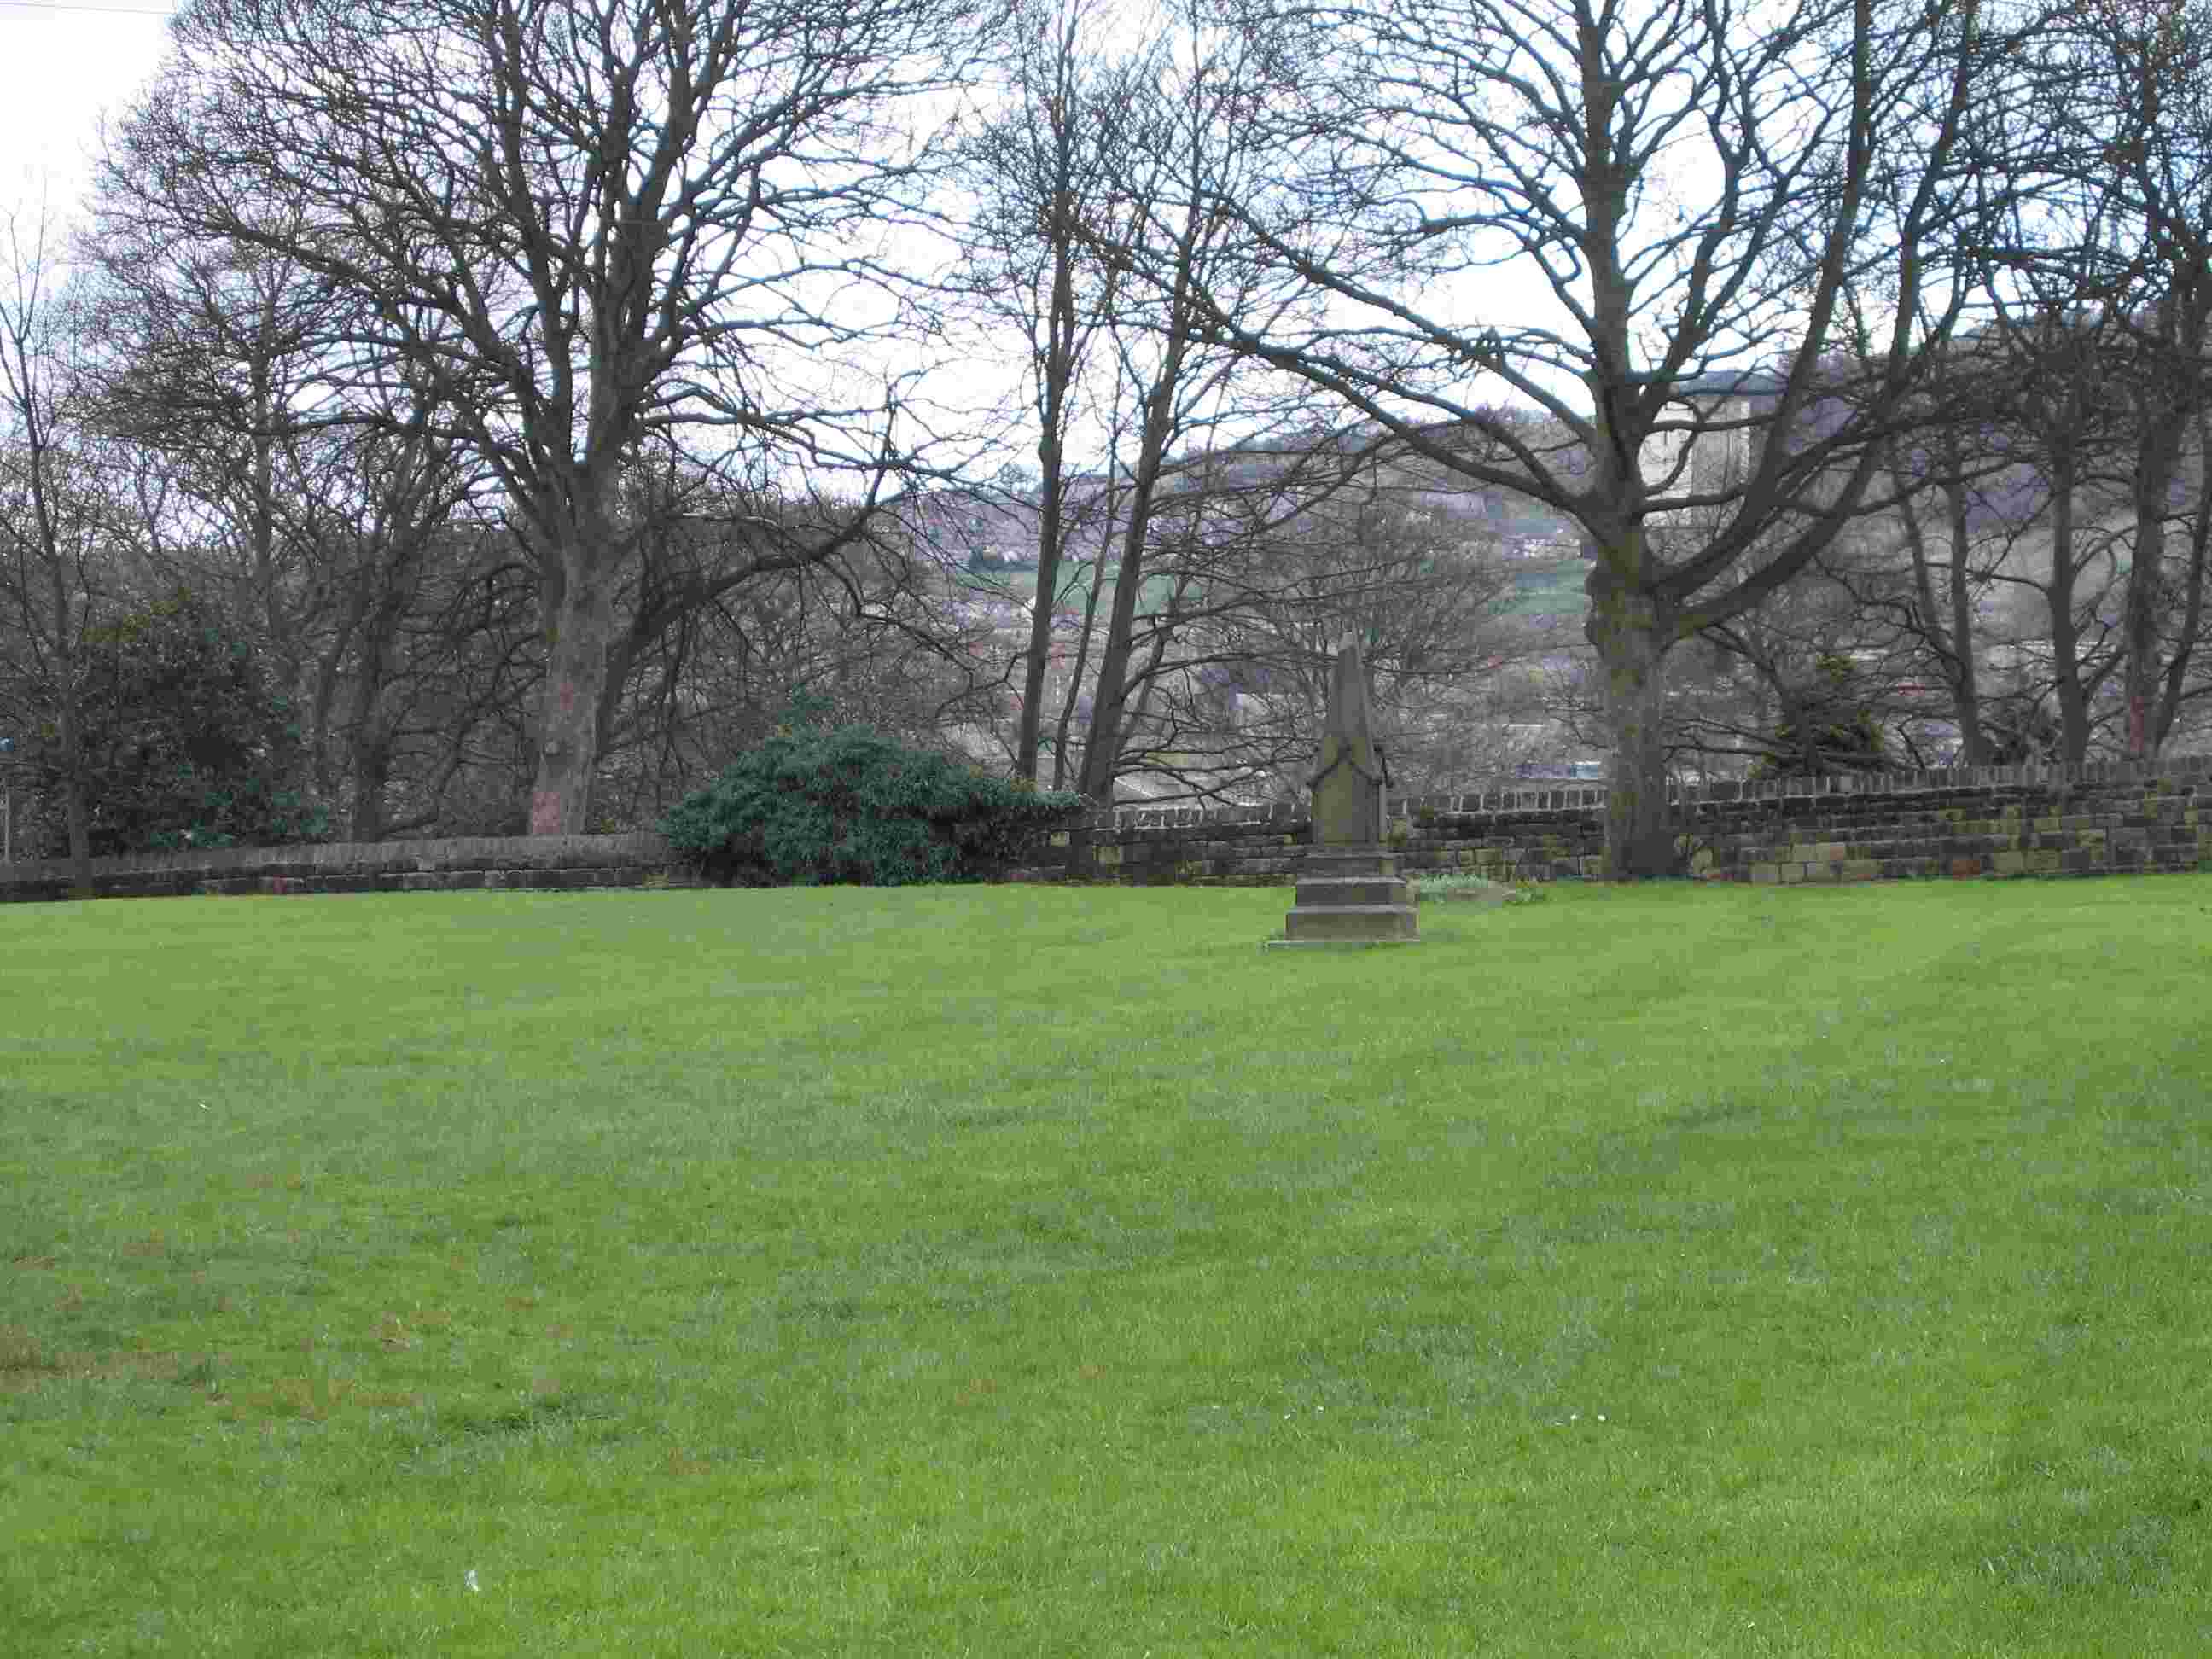 There are wide open spaces in the grounds of St Paul's Church, Shipley, Diocese of Bradford